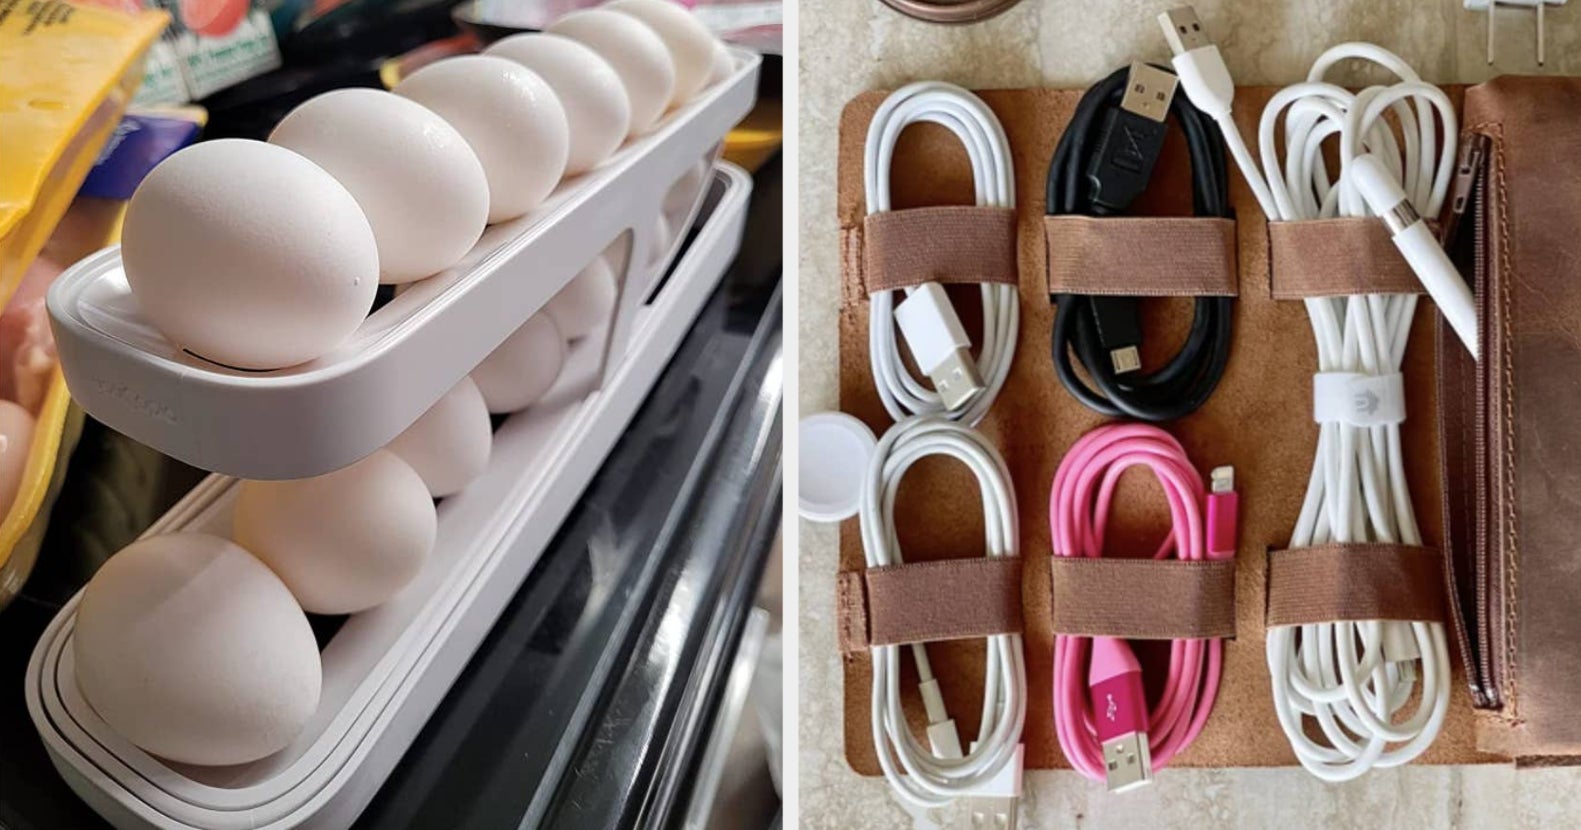 TikTok Home Organisation Must-Haves From As Low As $5.99